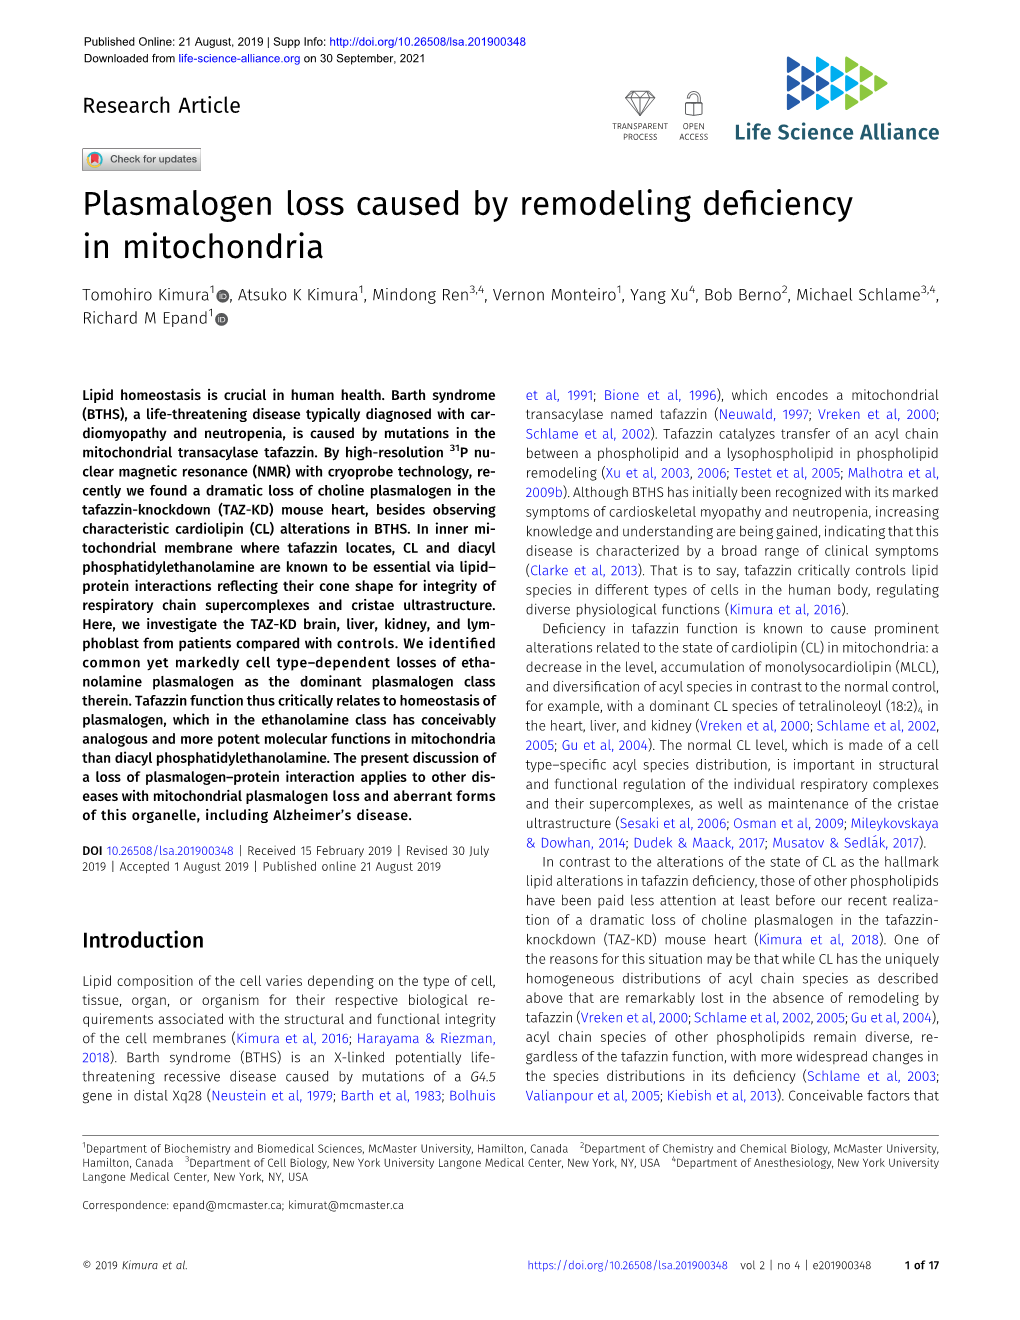 Plasmalogen Loss Caused by Remodeling Deficiency in Mitochondria